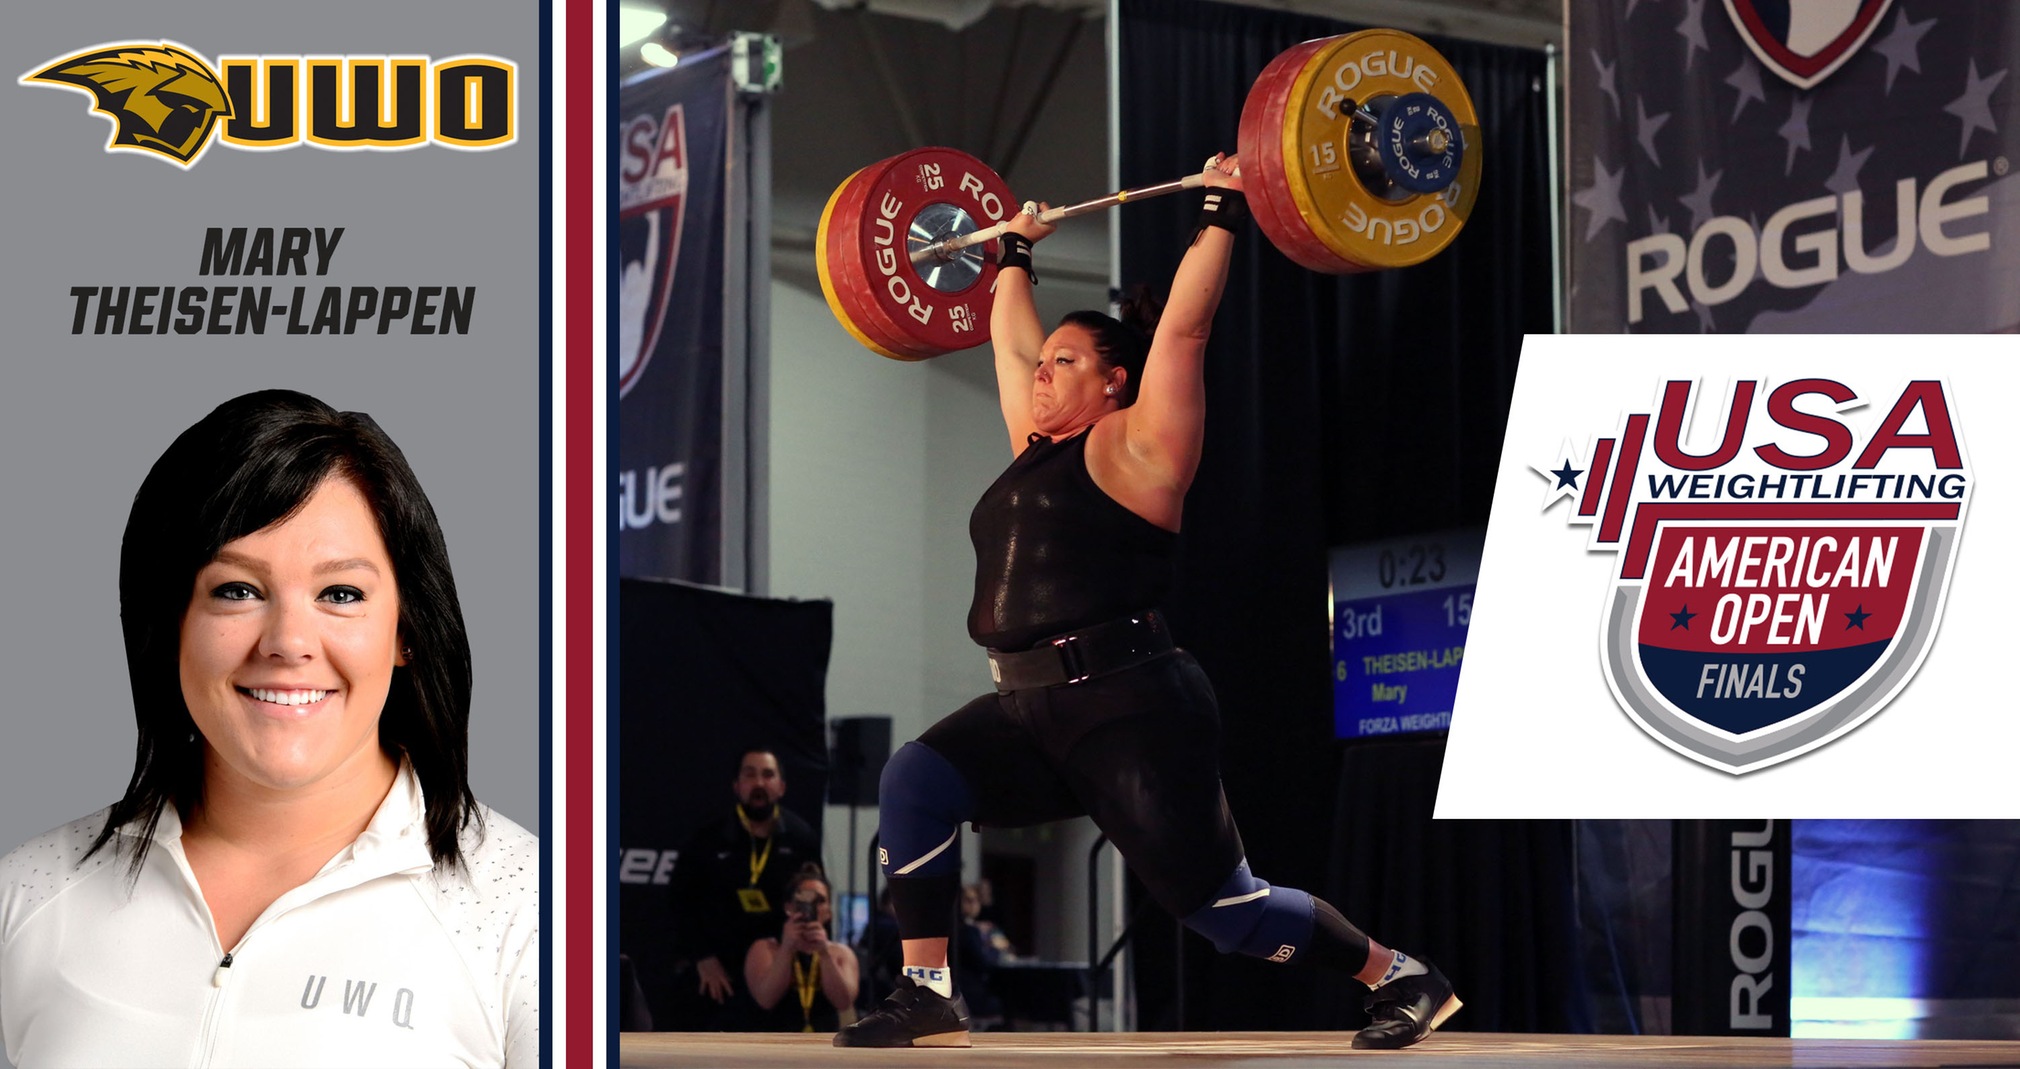 Titans' Track & Field Coach Wins USA Weightlifting Event